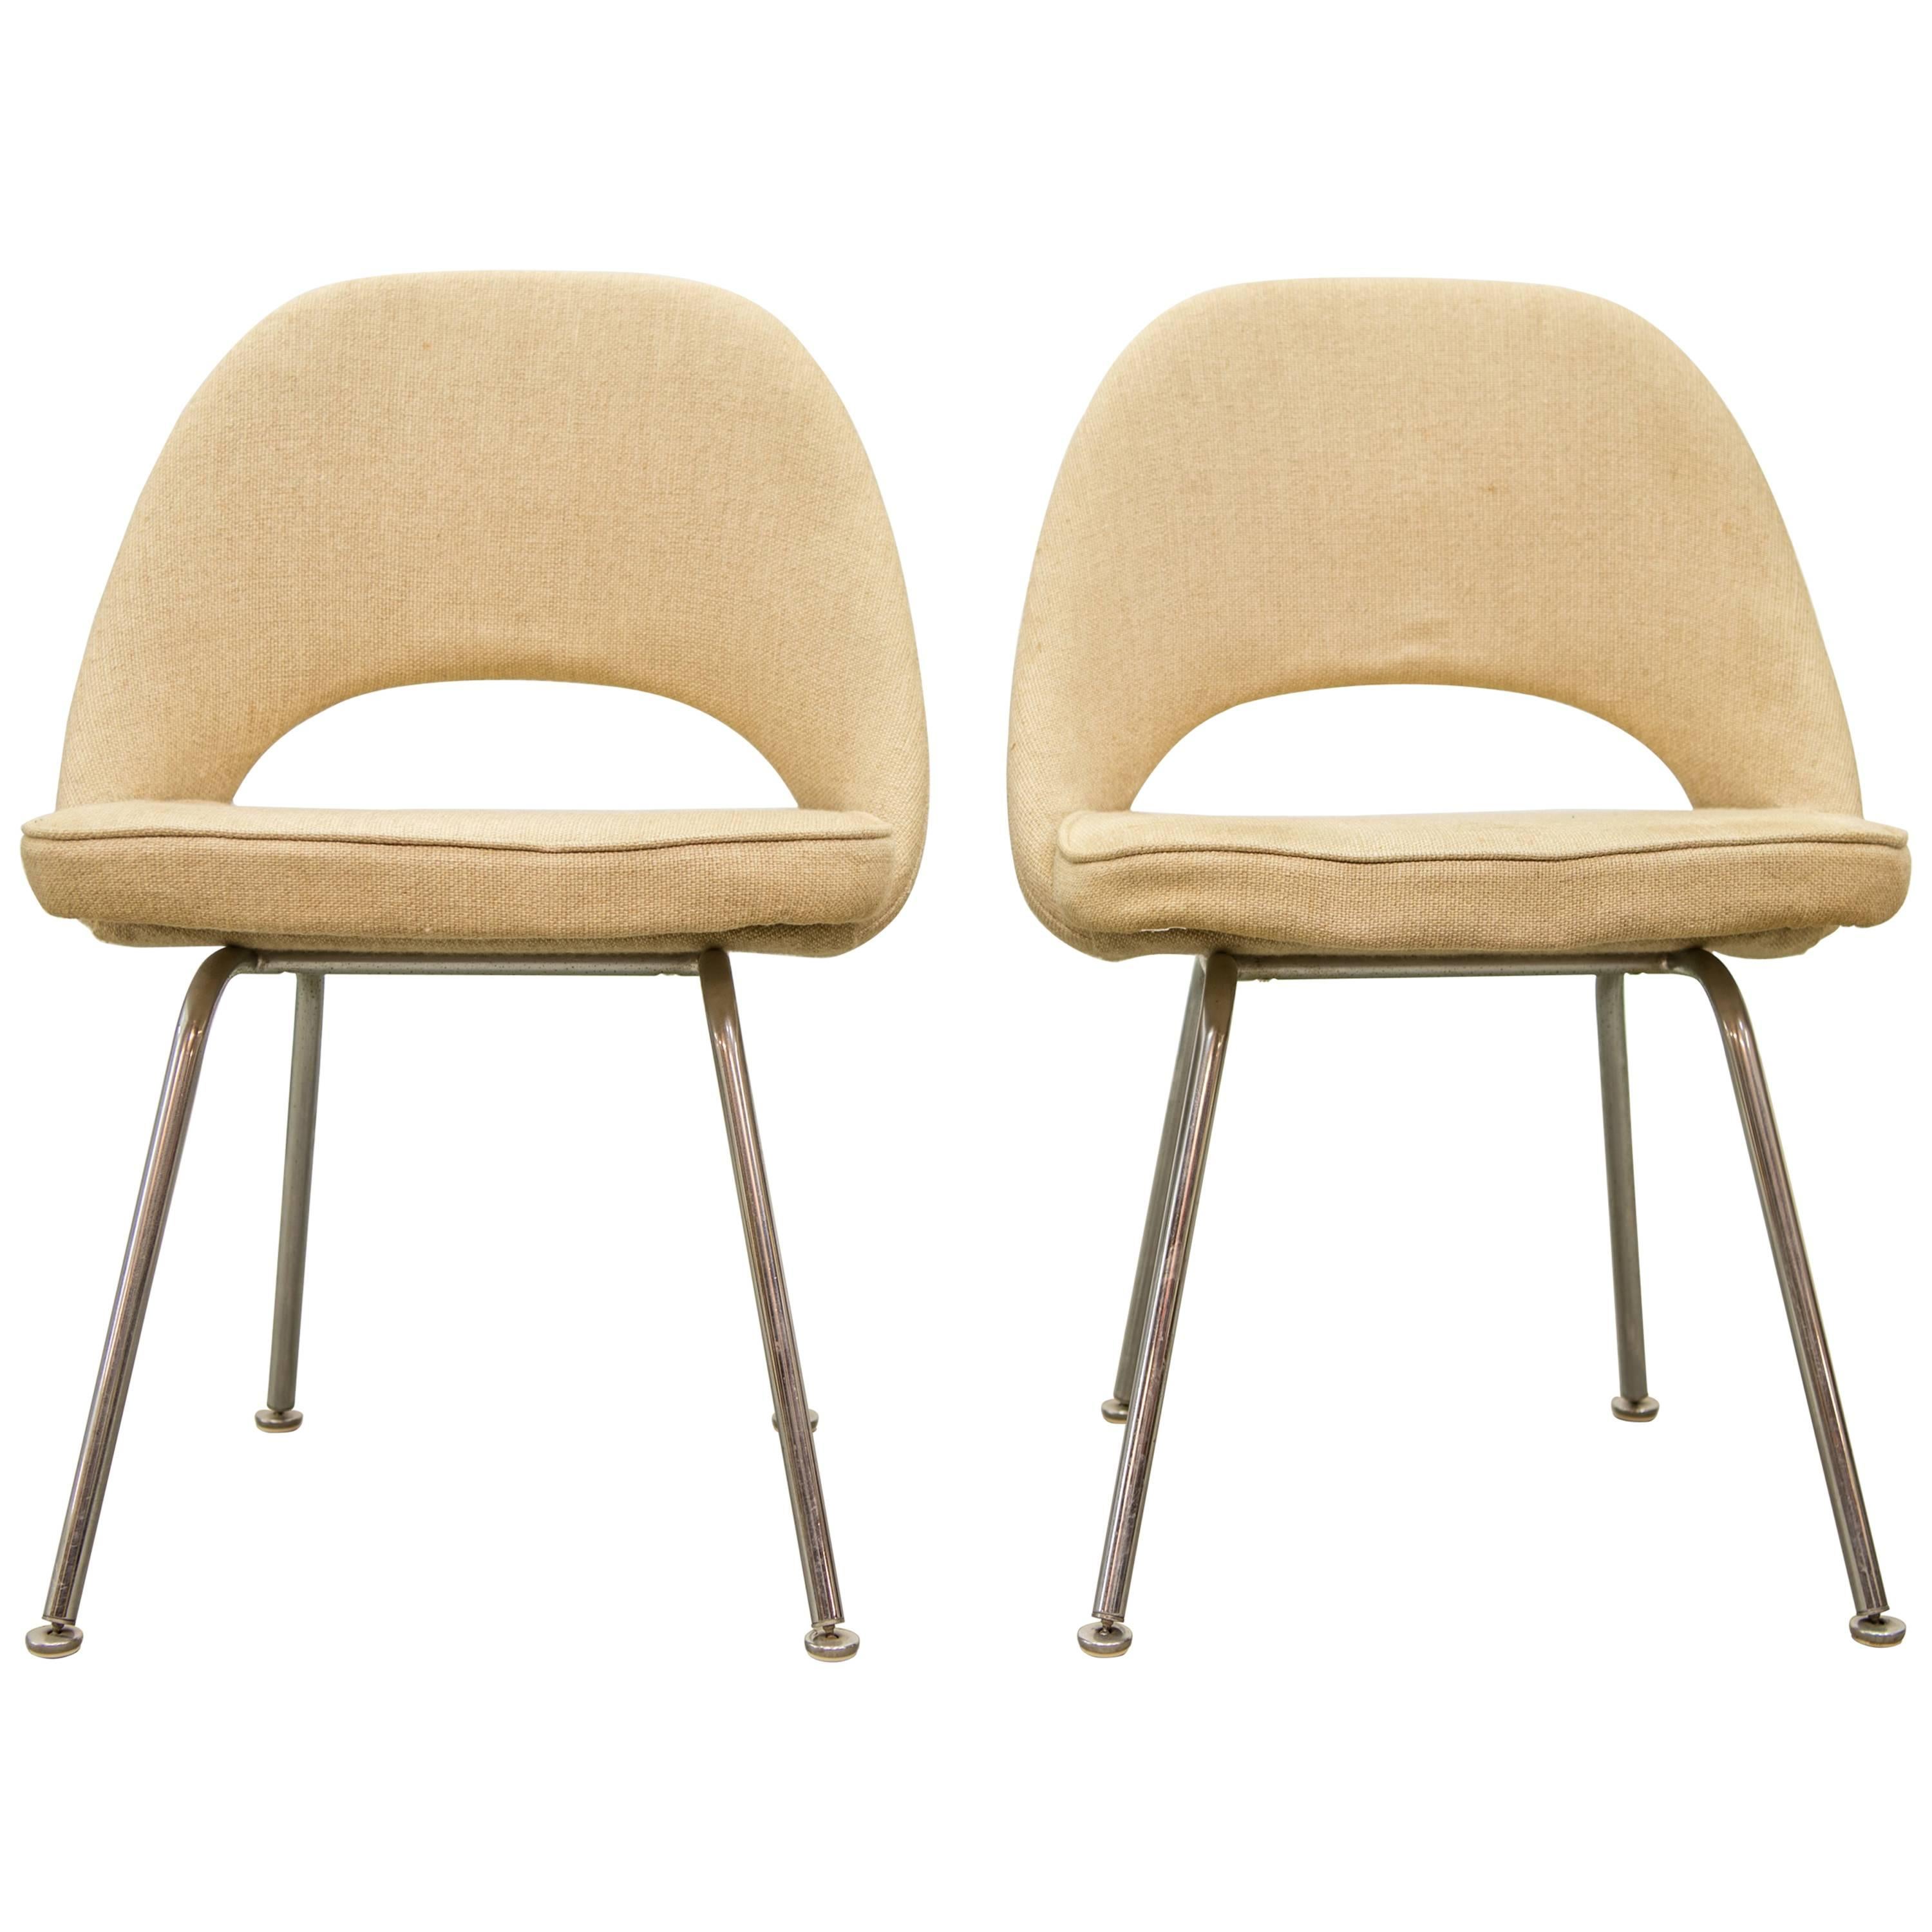 Eero Saarinen for Knoll, Pair of Dining Chairs on Chrome Feet For Sale